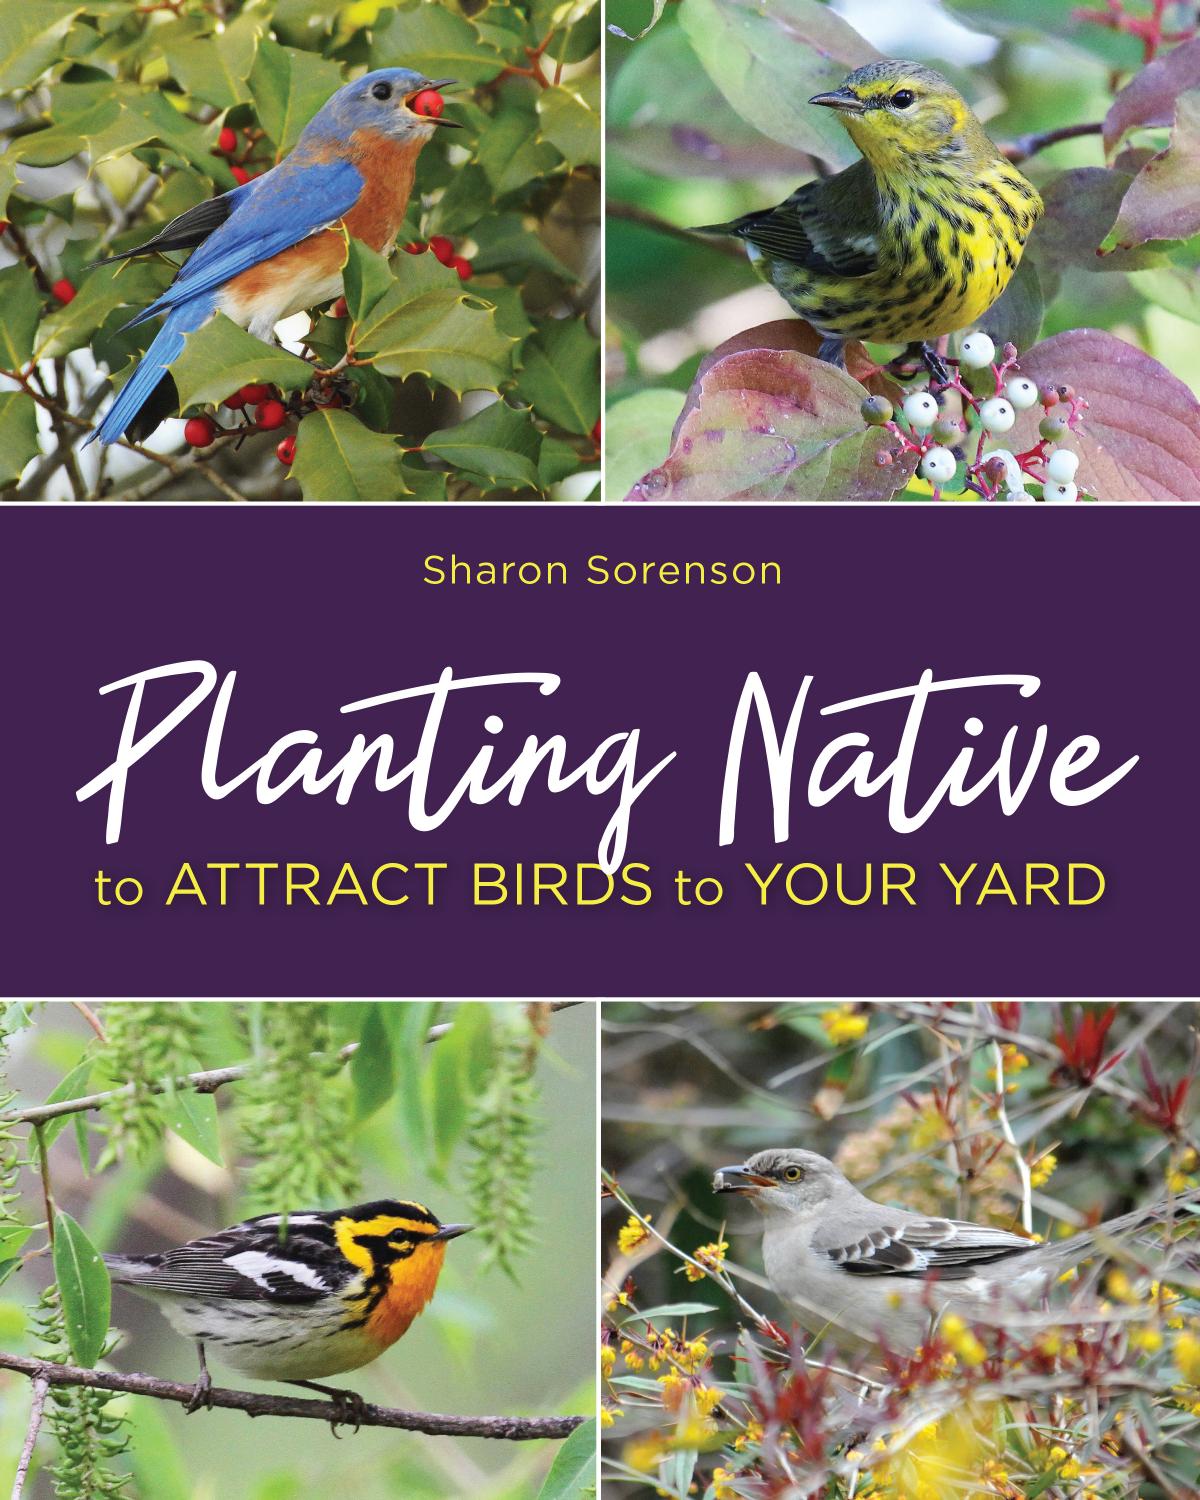 Planting Native to Attract Birds to Your Yard by Sharon Sorenson